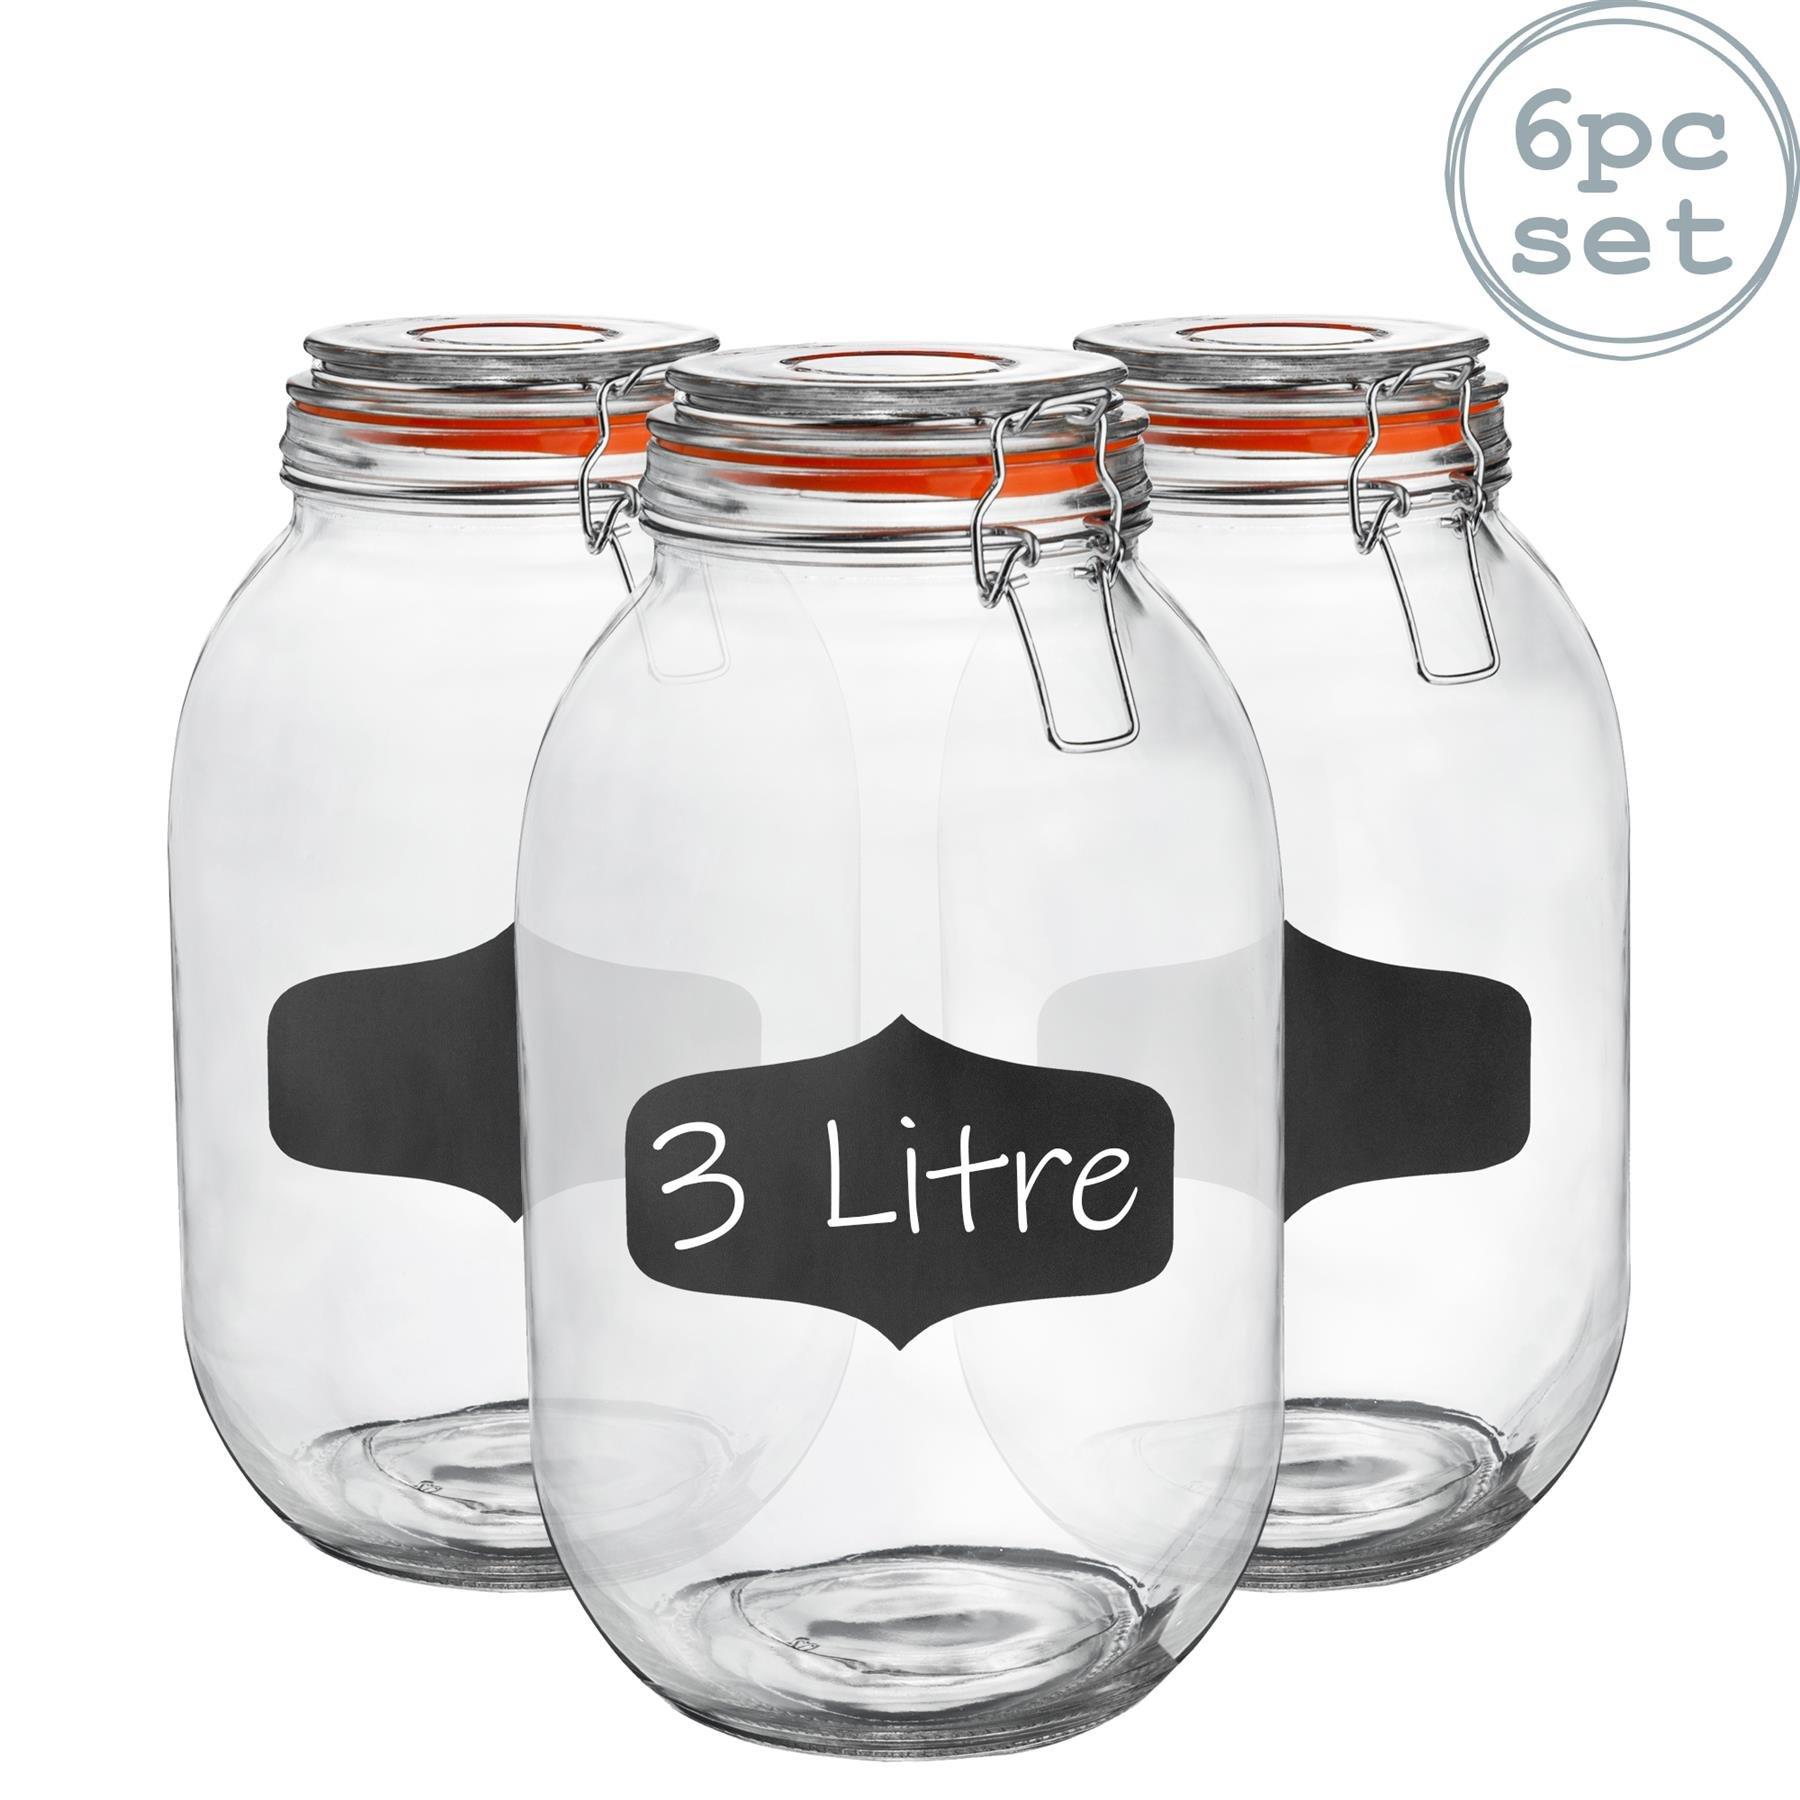 3000ml Preserving Jar with Airtight Clip Lid and Chalkboard Stickers 